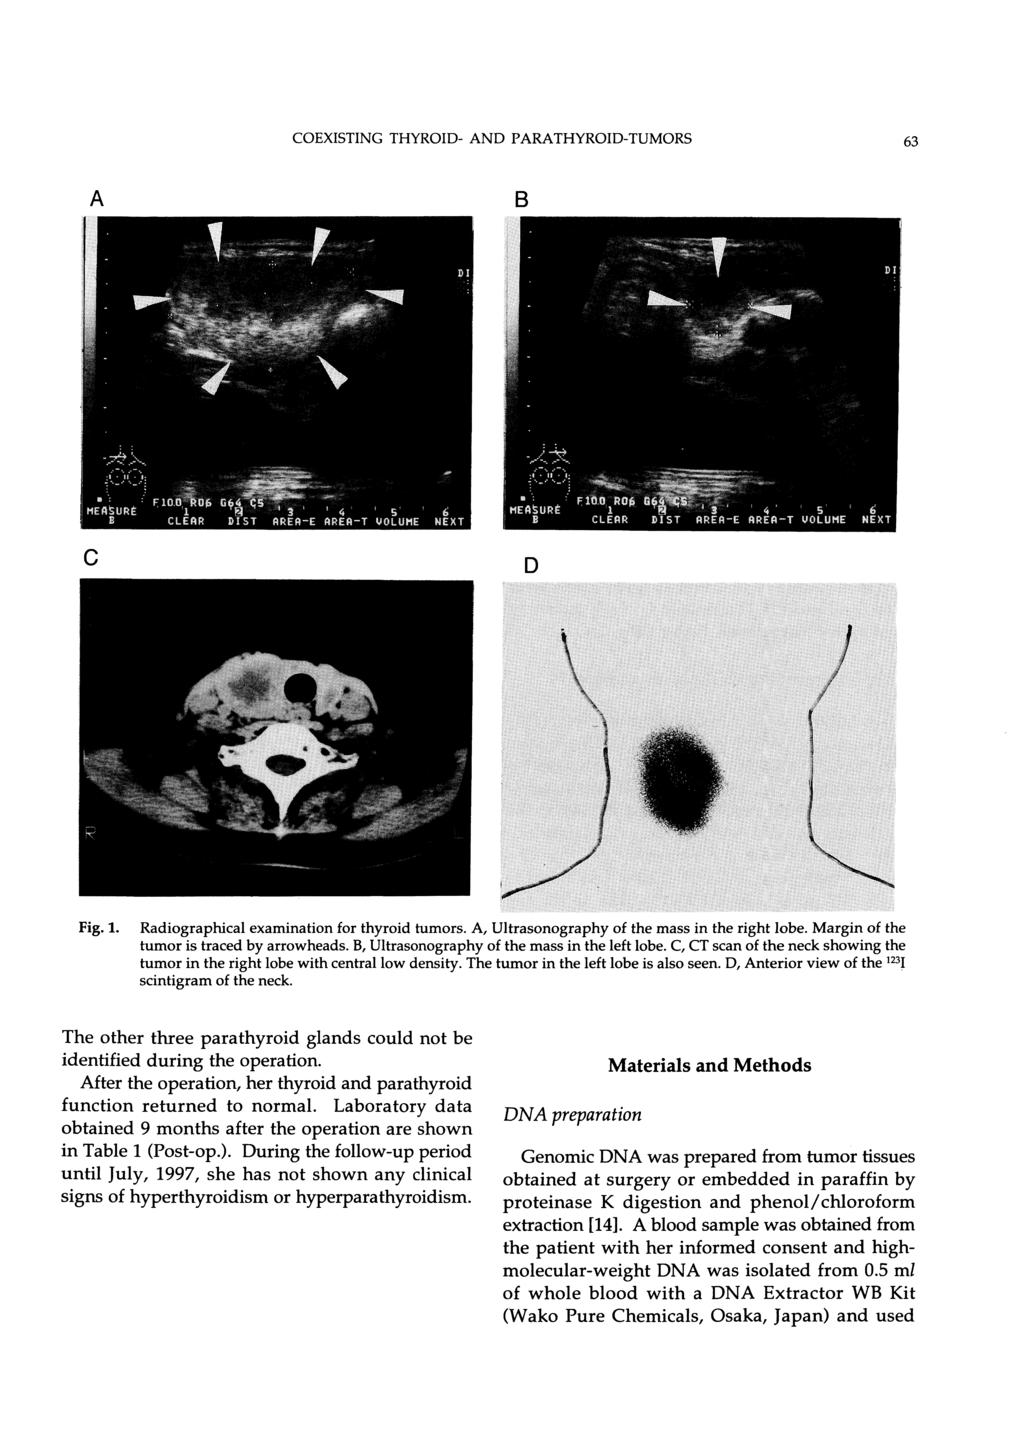 COEXISTING THYROID- AND PARATHYROID-TUMORS 63 Fig. 1. Radiographical examination for thyroid tumors. A, Ultrasonography of the mass in the right lobe. Margin of the tumor is traced by arrowheads.